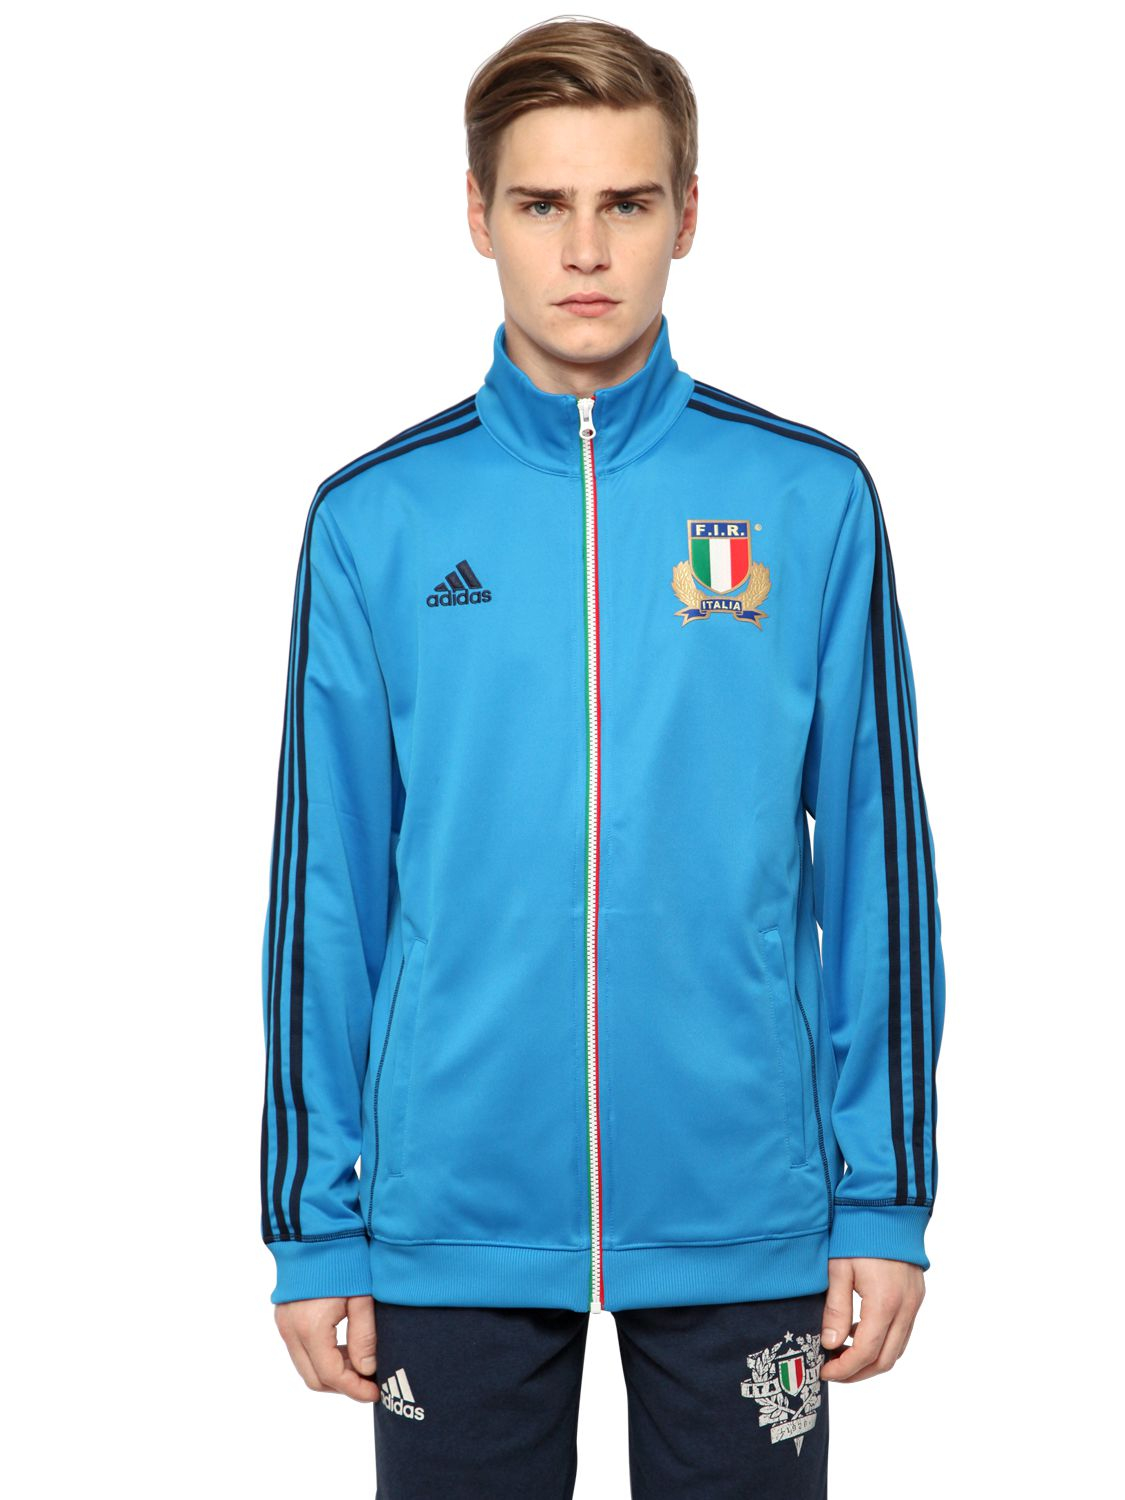 Lyst - Adidas originals Italy Rugby Team Zip-up Track Jacket in Blue